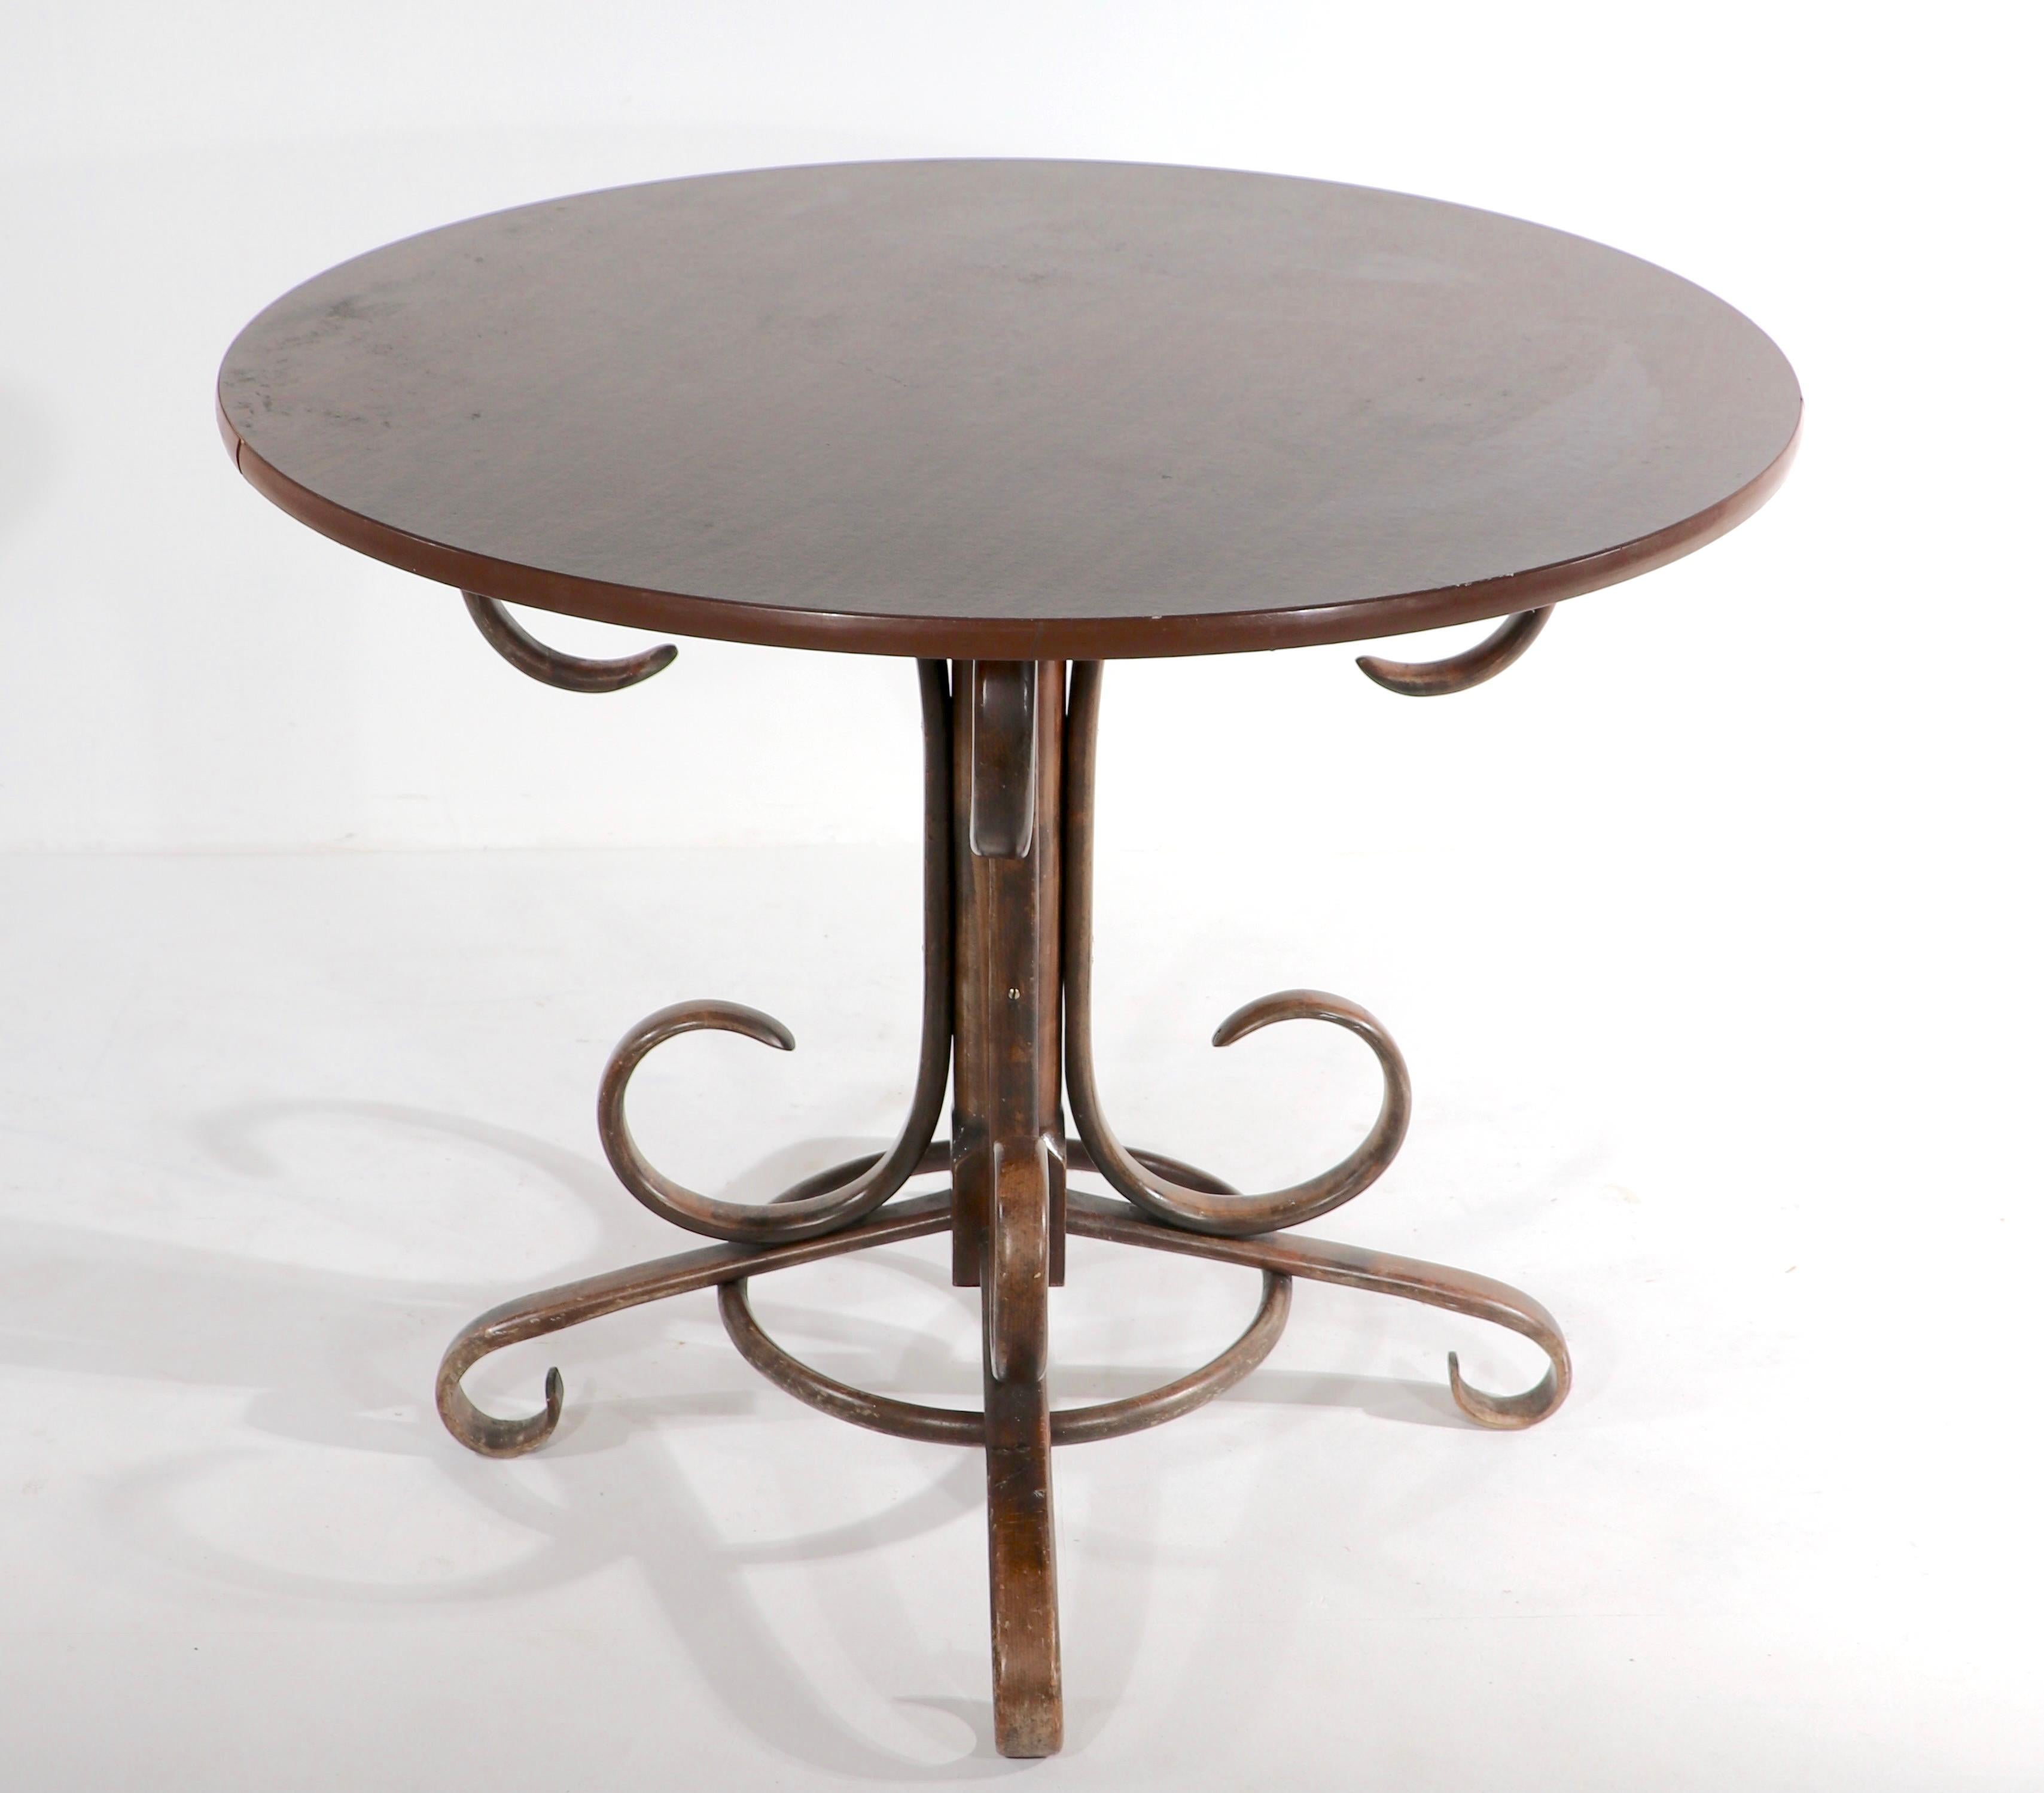 Chic voguish Vienna Secessionist style cafe dining table made in Italy circa 1970’s. Steam bent wood base, faux wood formica top. It’s medium scale makes this table easy to place and totally functional. This listing includes the cafe table only, not